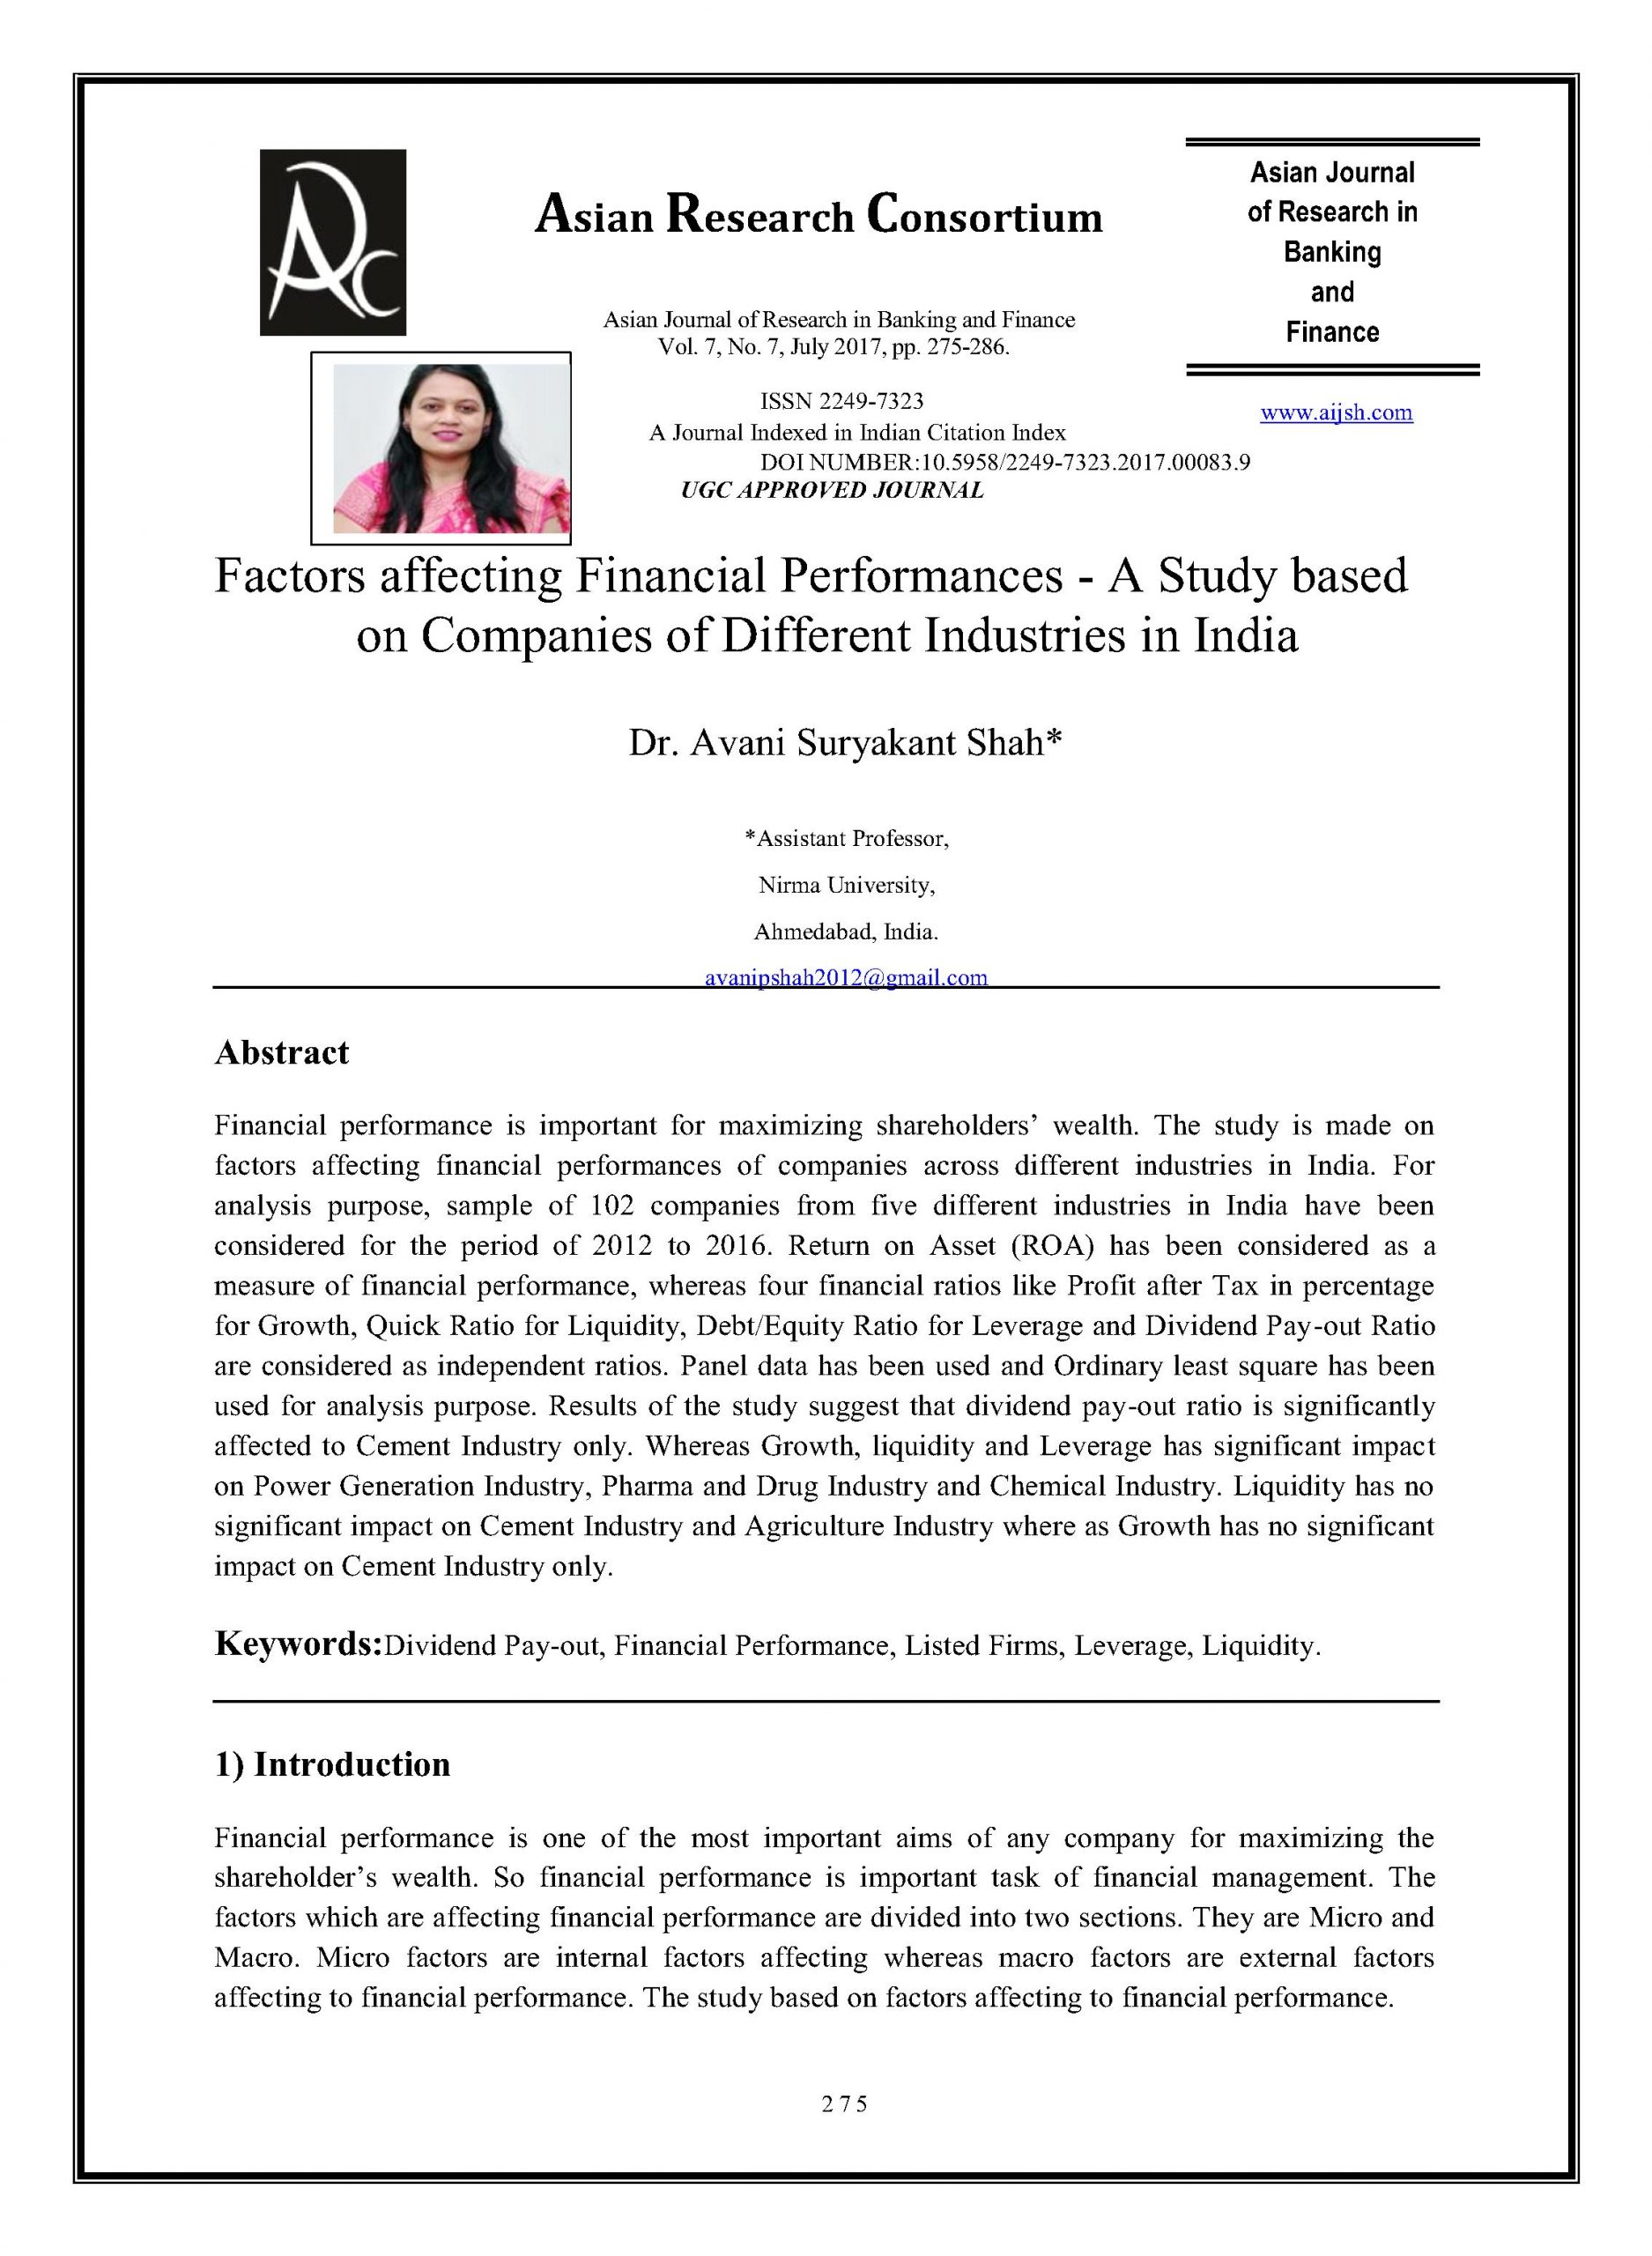 Factors affecting Financial Performances – A Study based on Companies of Different Industries in India